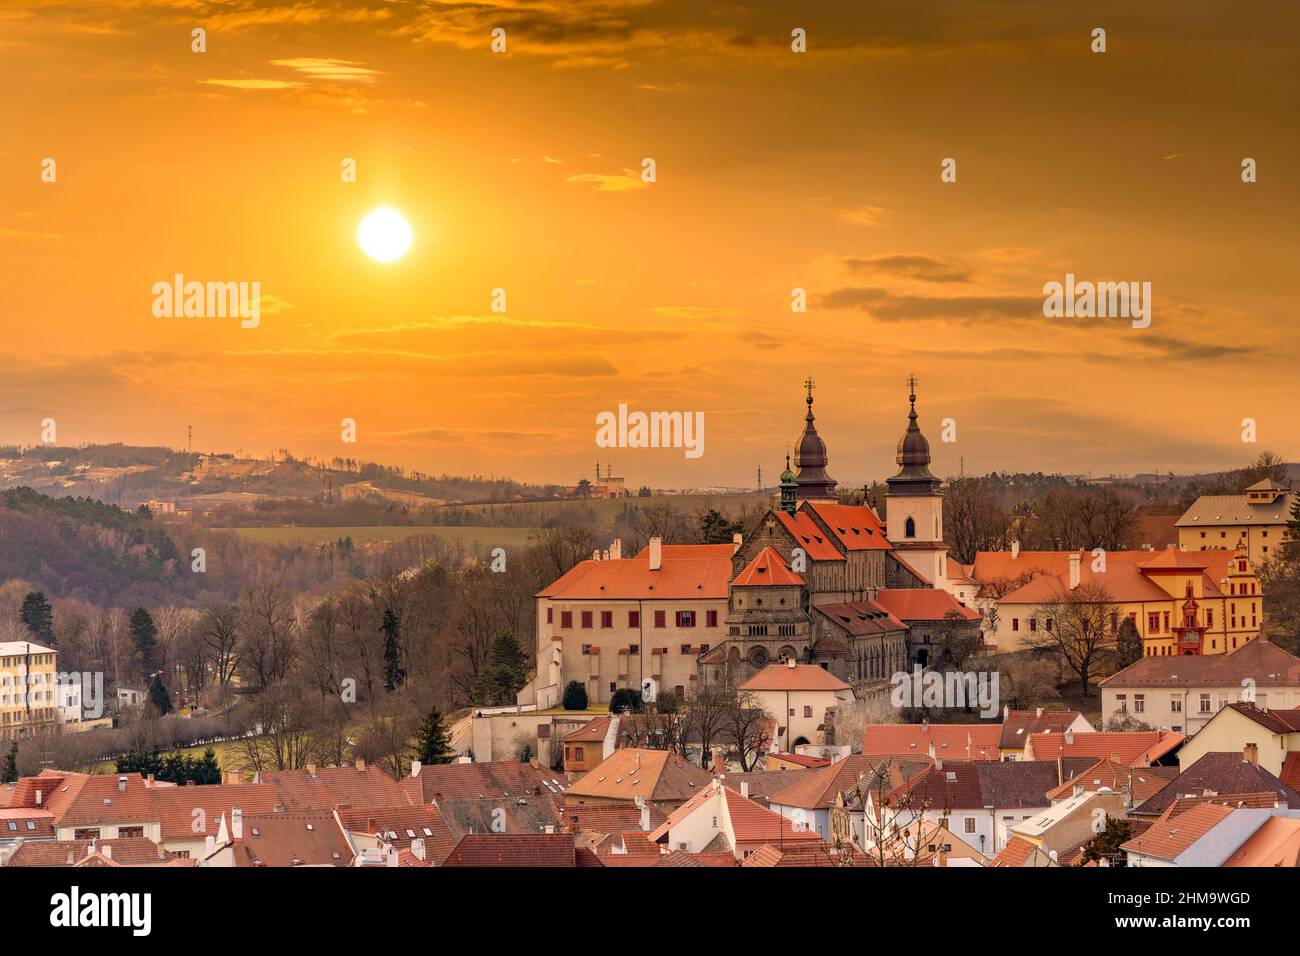 St. Procopius basilica and monastery, jewish town Trebic (the oldest Middle ages settlement of jew community in Central Europe), Moravia, Czechia Stock Photo